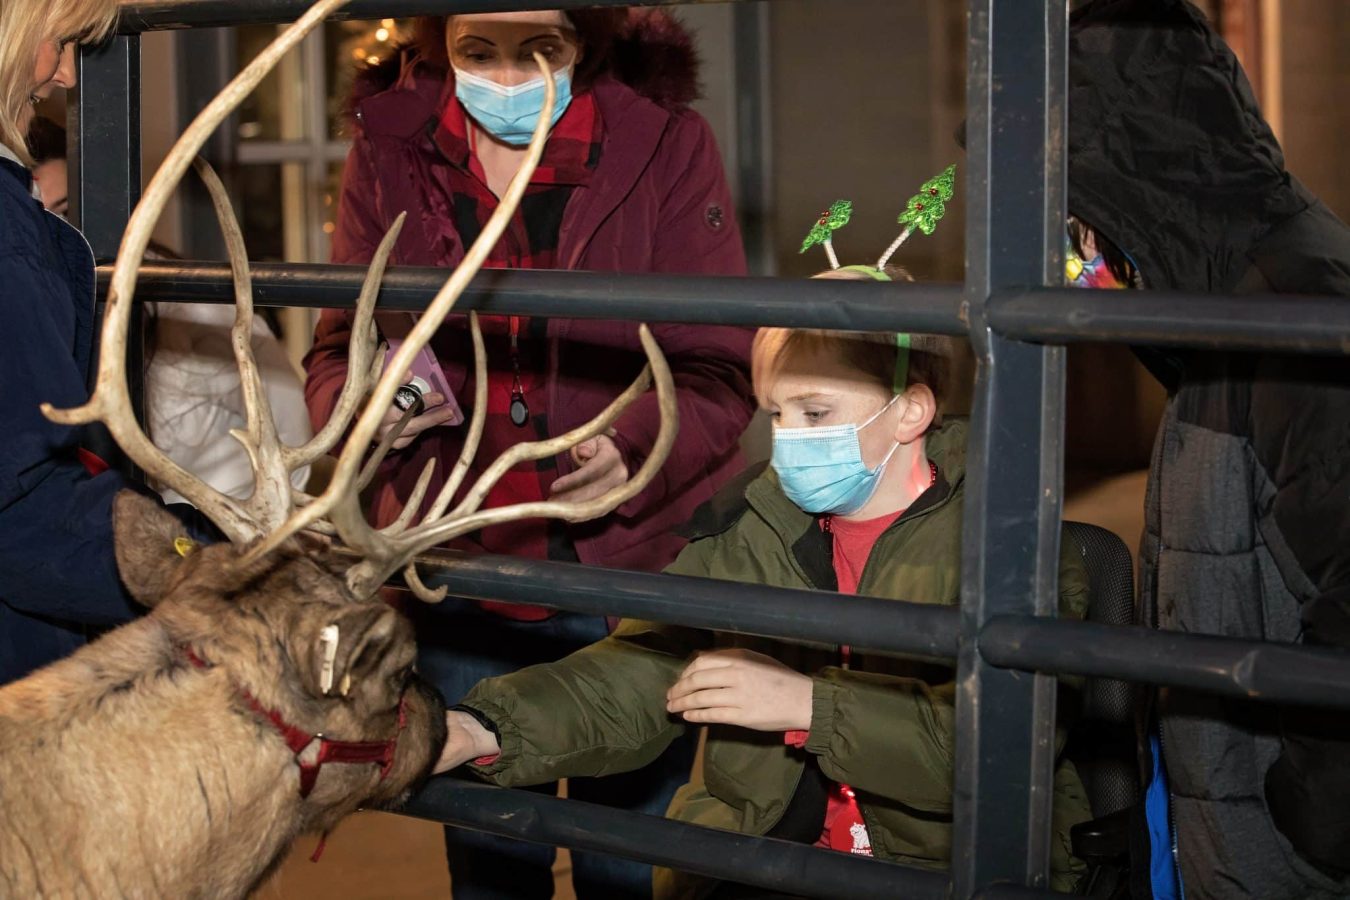 Image from Comfort and Joy - Kid holding a reindeer